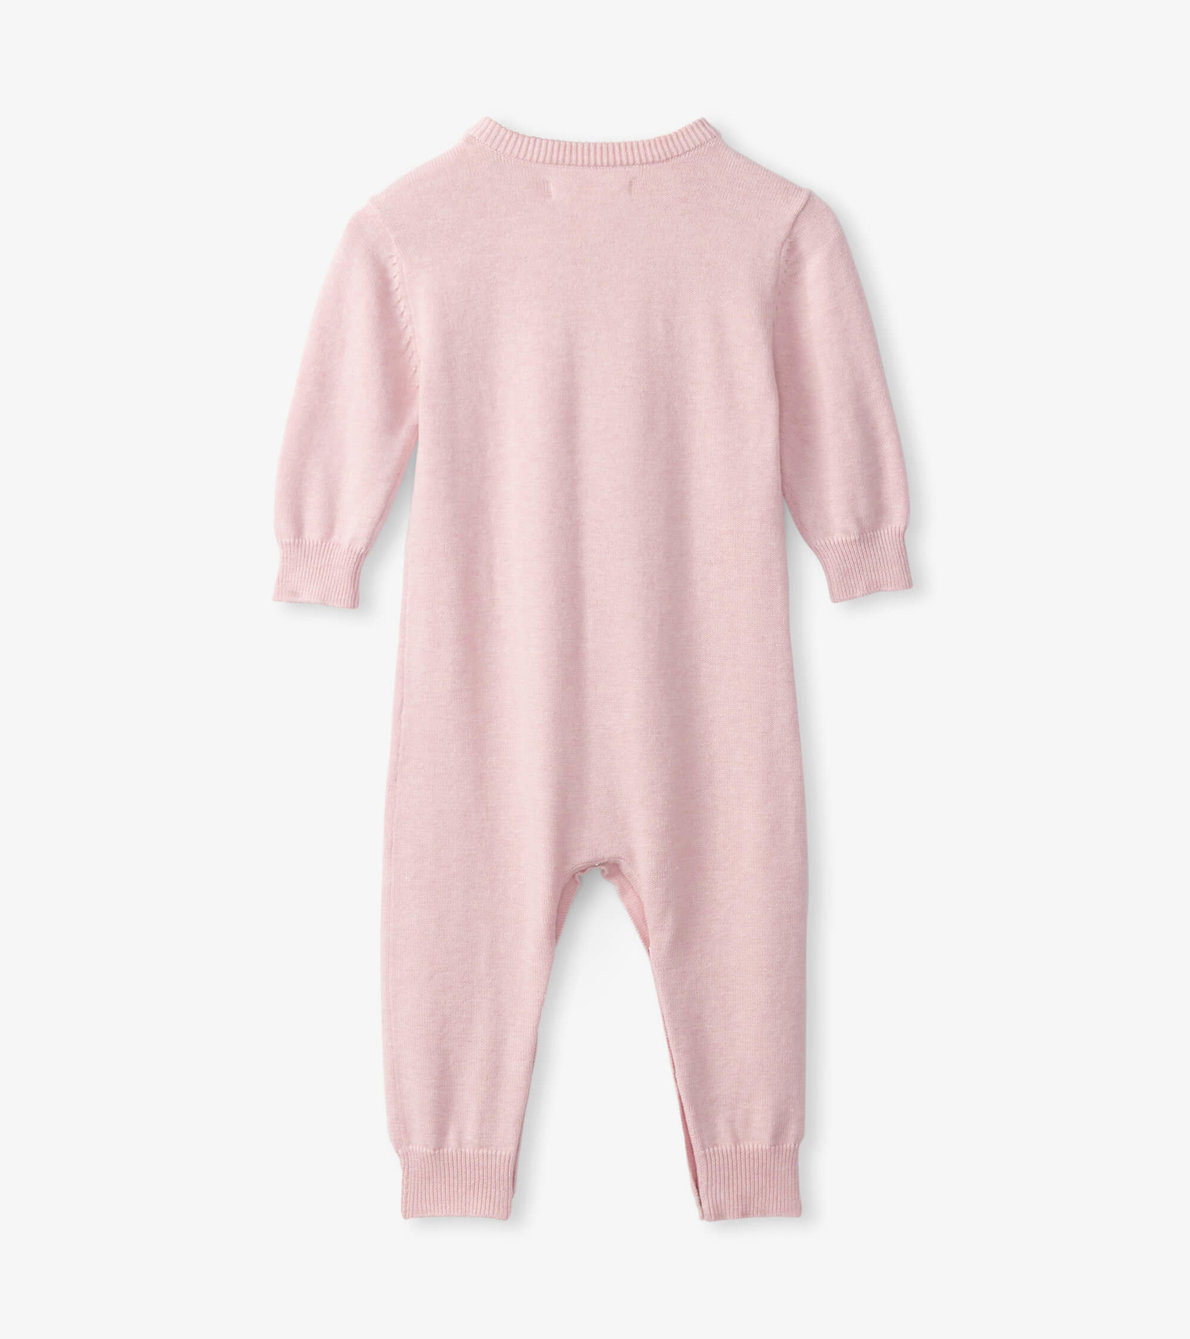 View larger image of Baby Big Heart Sweater Onesie